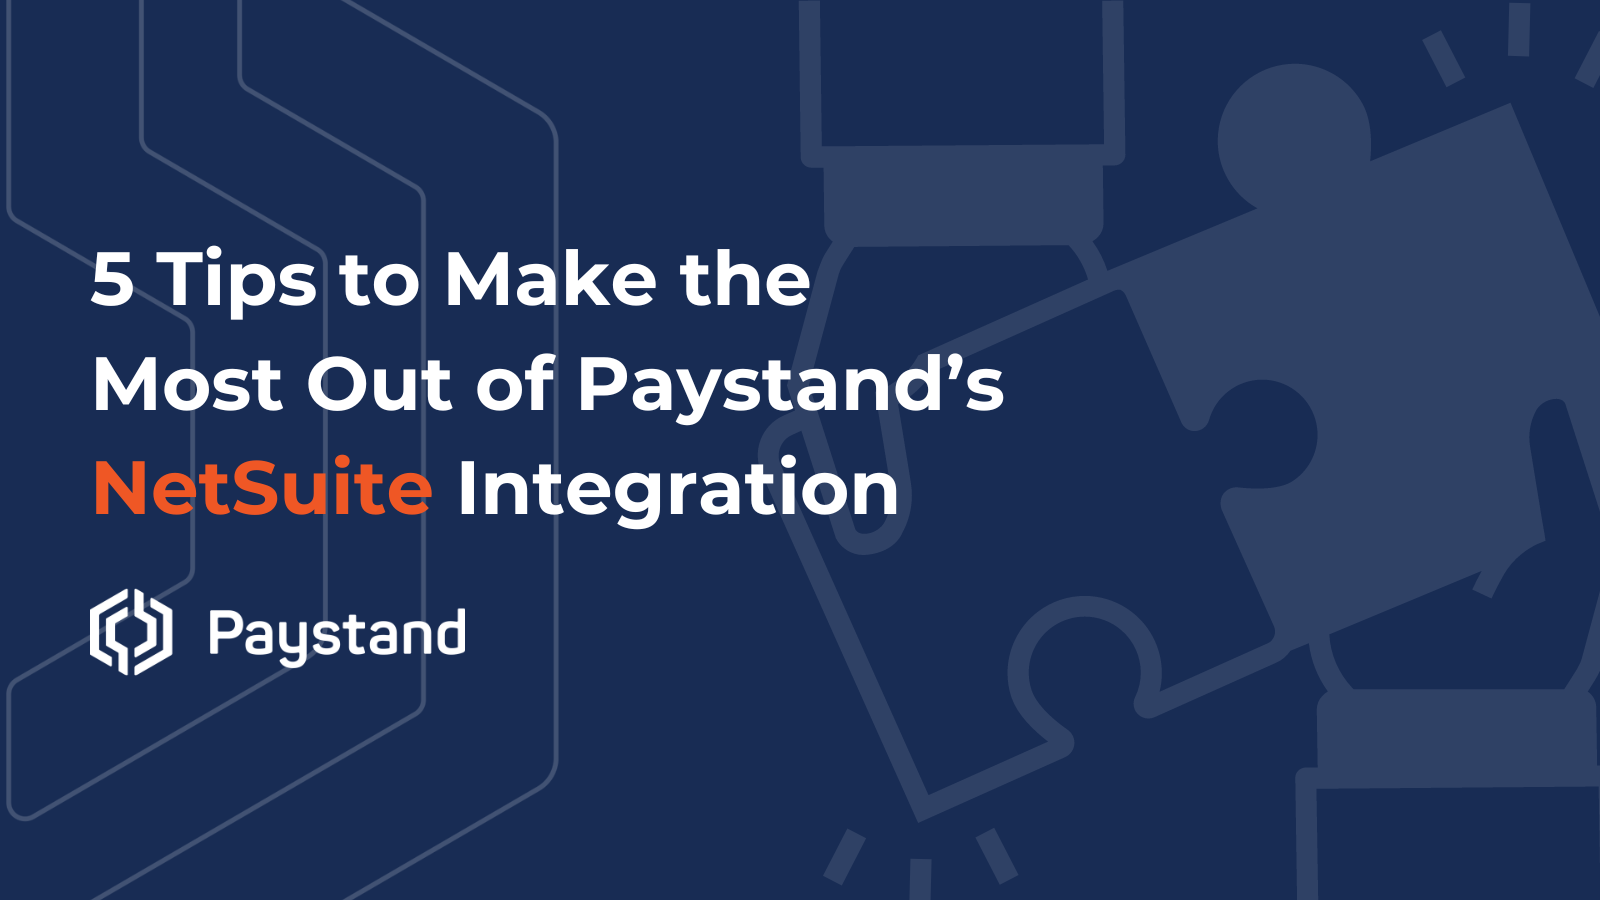 Tips to Make the Most Out of Paystand's NetSuite Integration